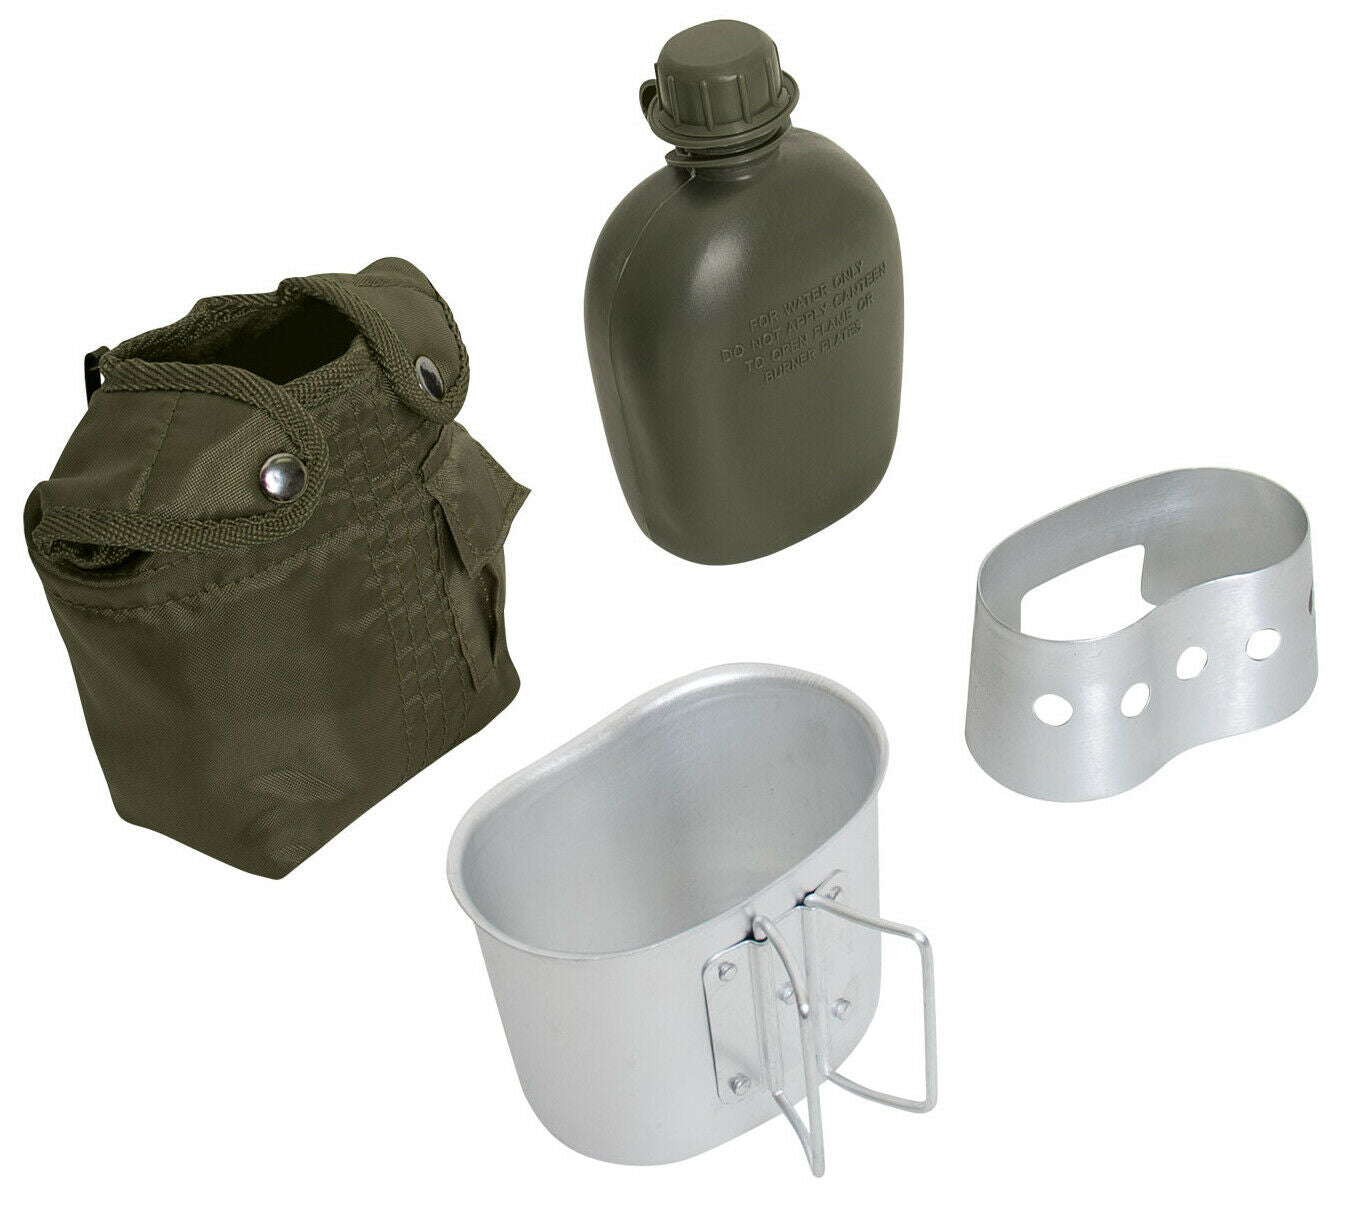 Rothco 4 Piece Canteen Kit With Cover, Aluminum Cup & Stove Stand